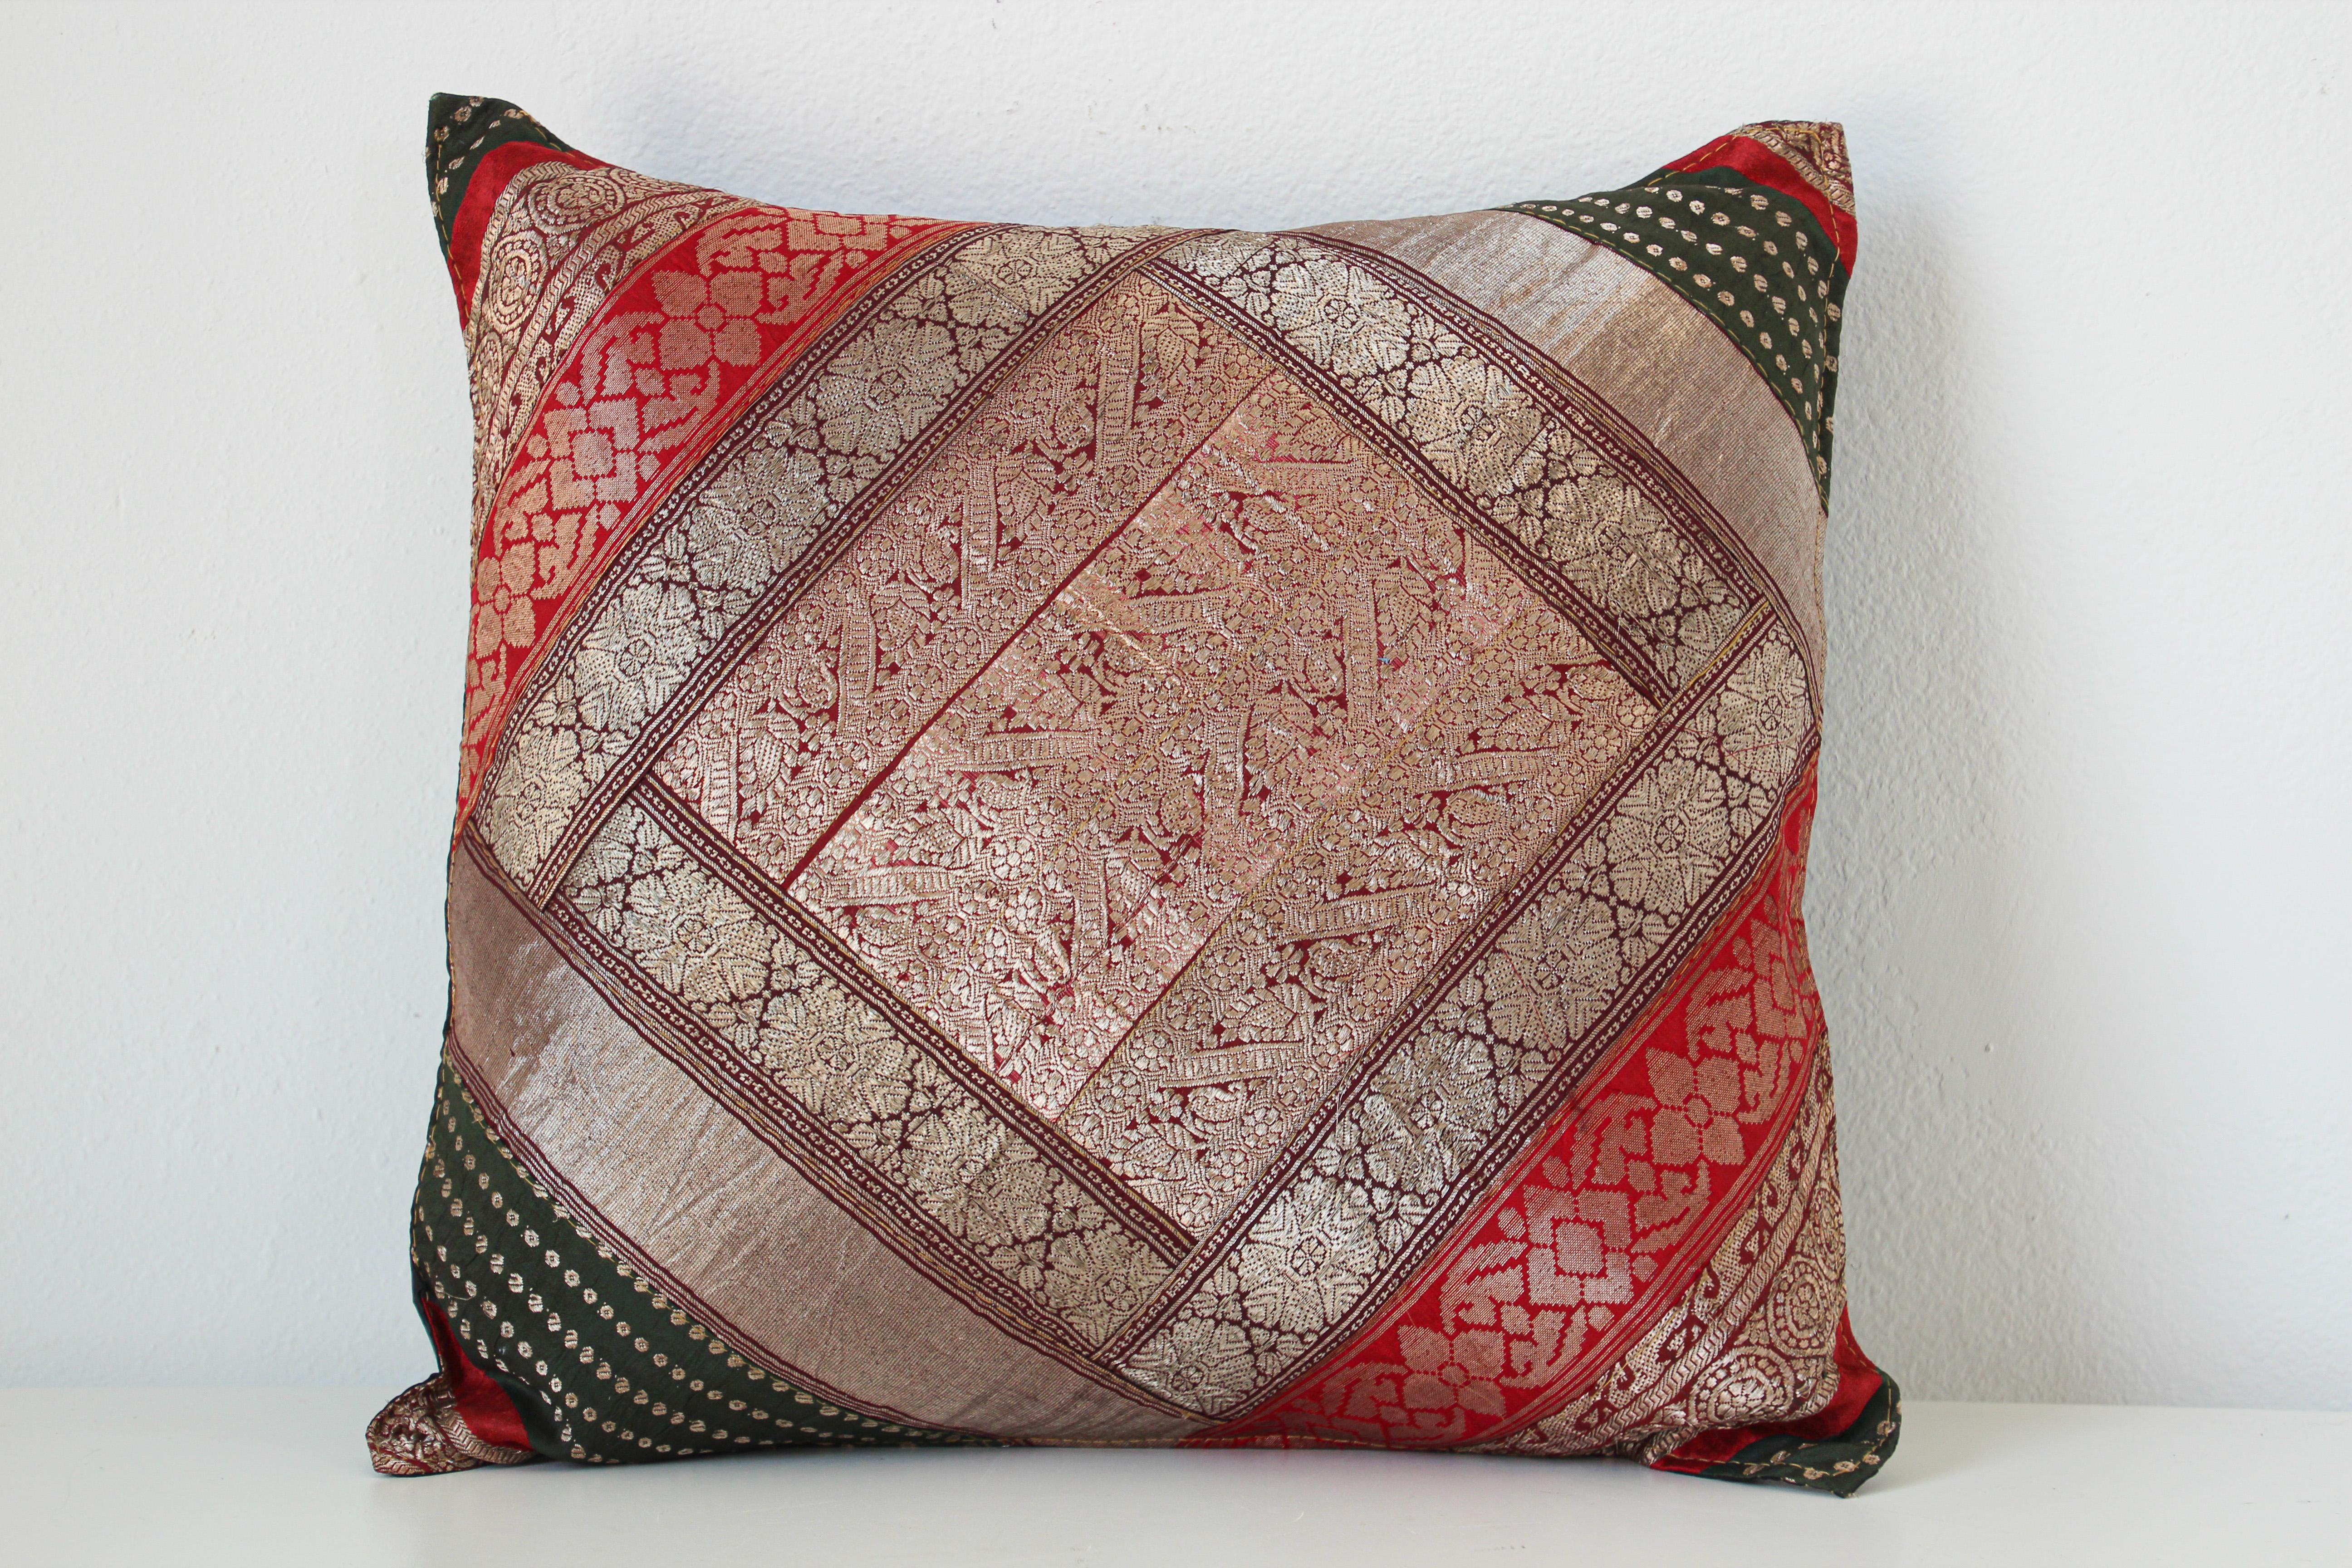 Description
Decorative accent silk throw pillow made from vintage sari borders.
One of a kind silk sari, red, green, gold, green, purple, metallic threads sari borders.
Handcrafted in India.
We do have multiple in this style, but each one is